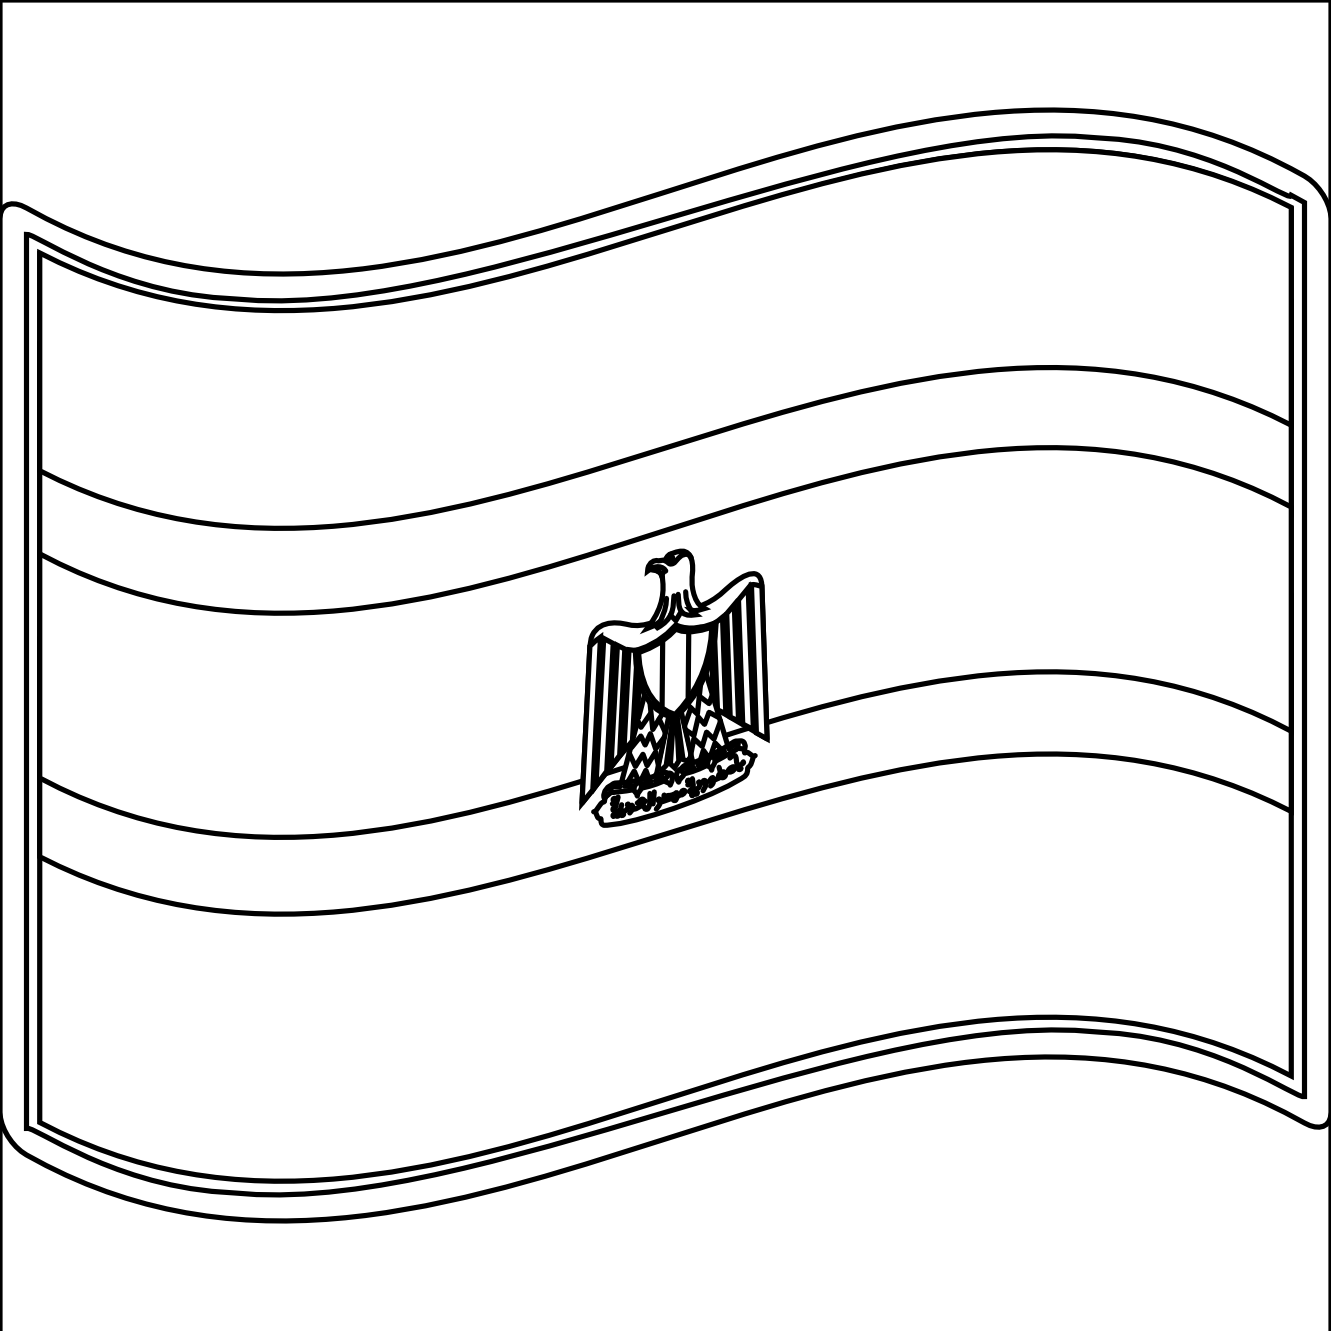 Egypt Flag Coloring Page - Coloring Home